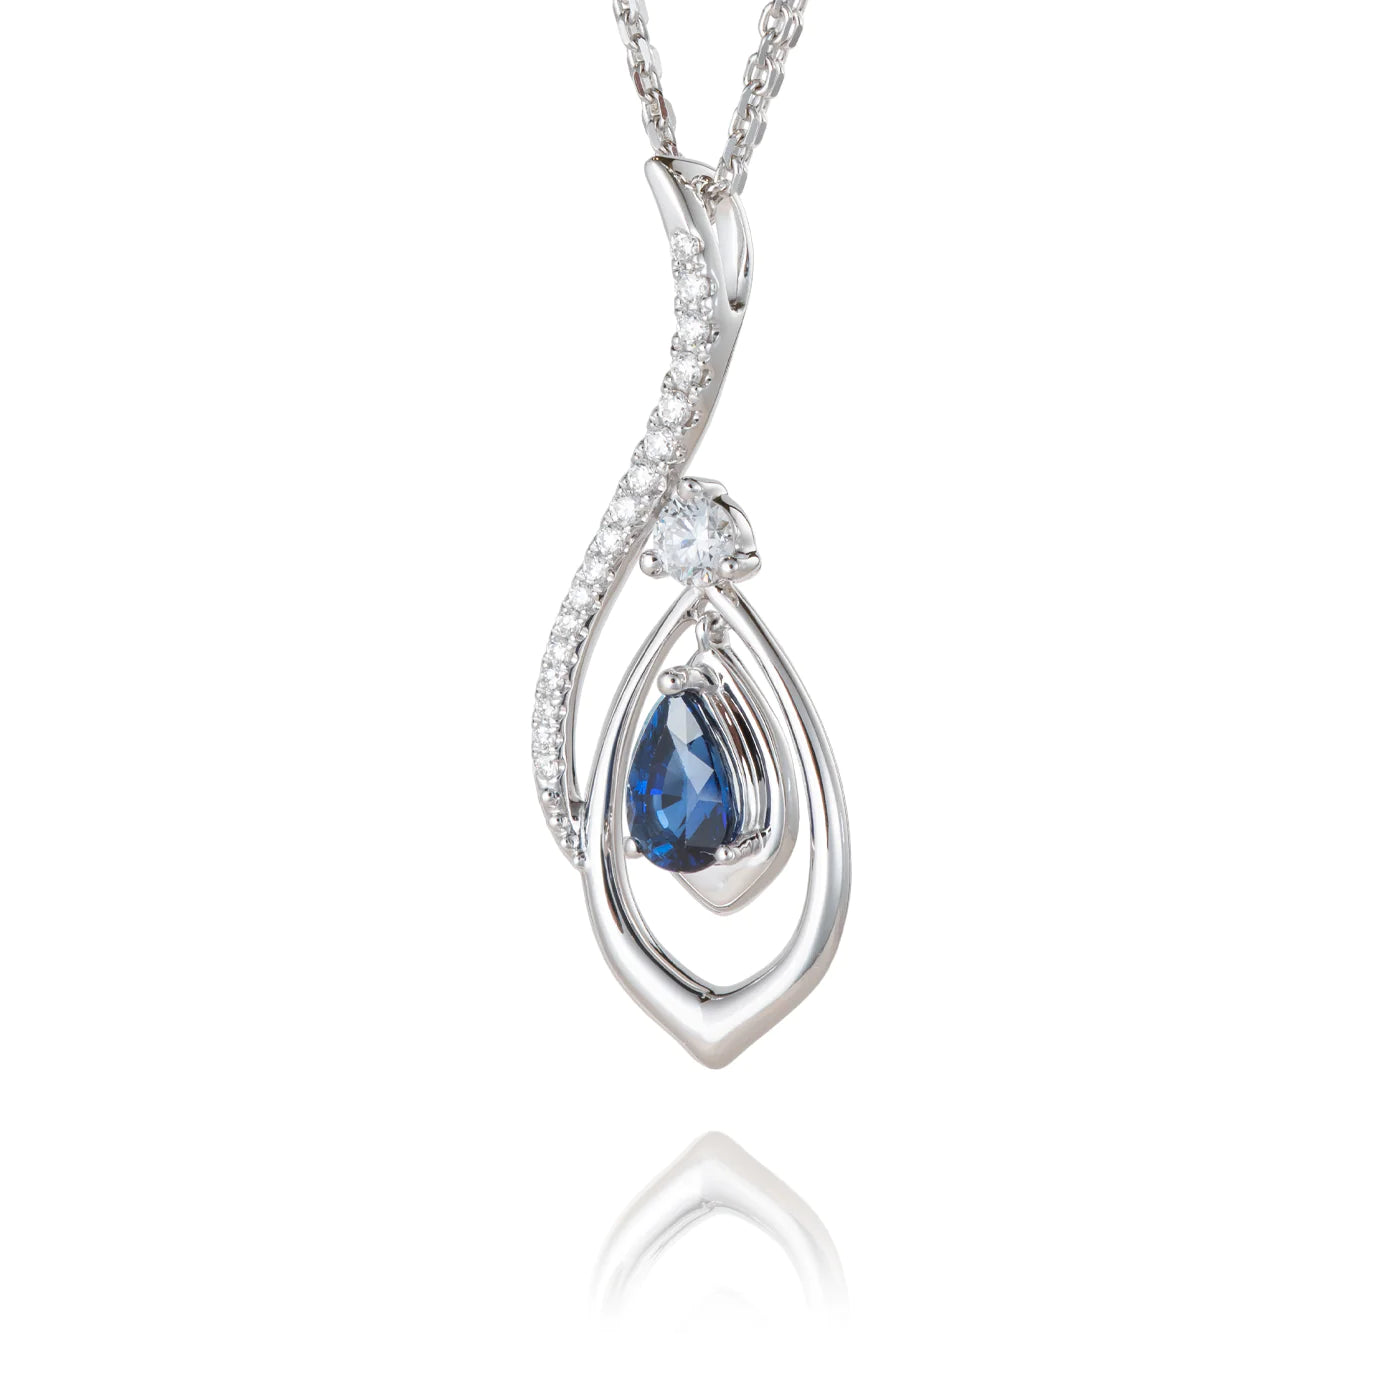 The Heavenly Phoenix Necklace 18kt White Gold with Sapphire